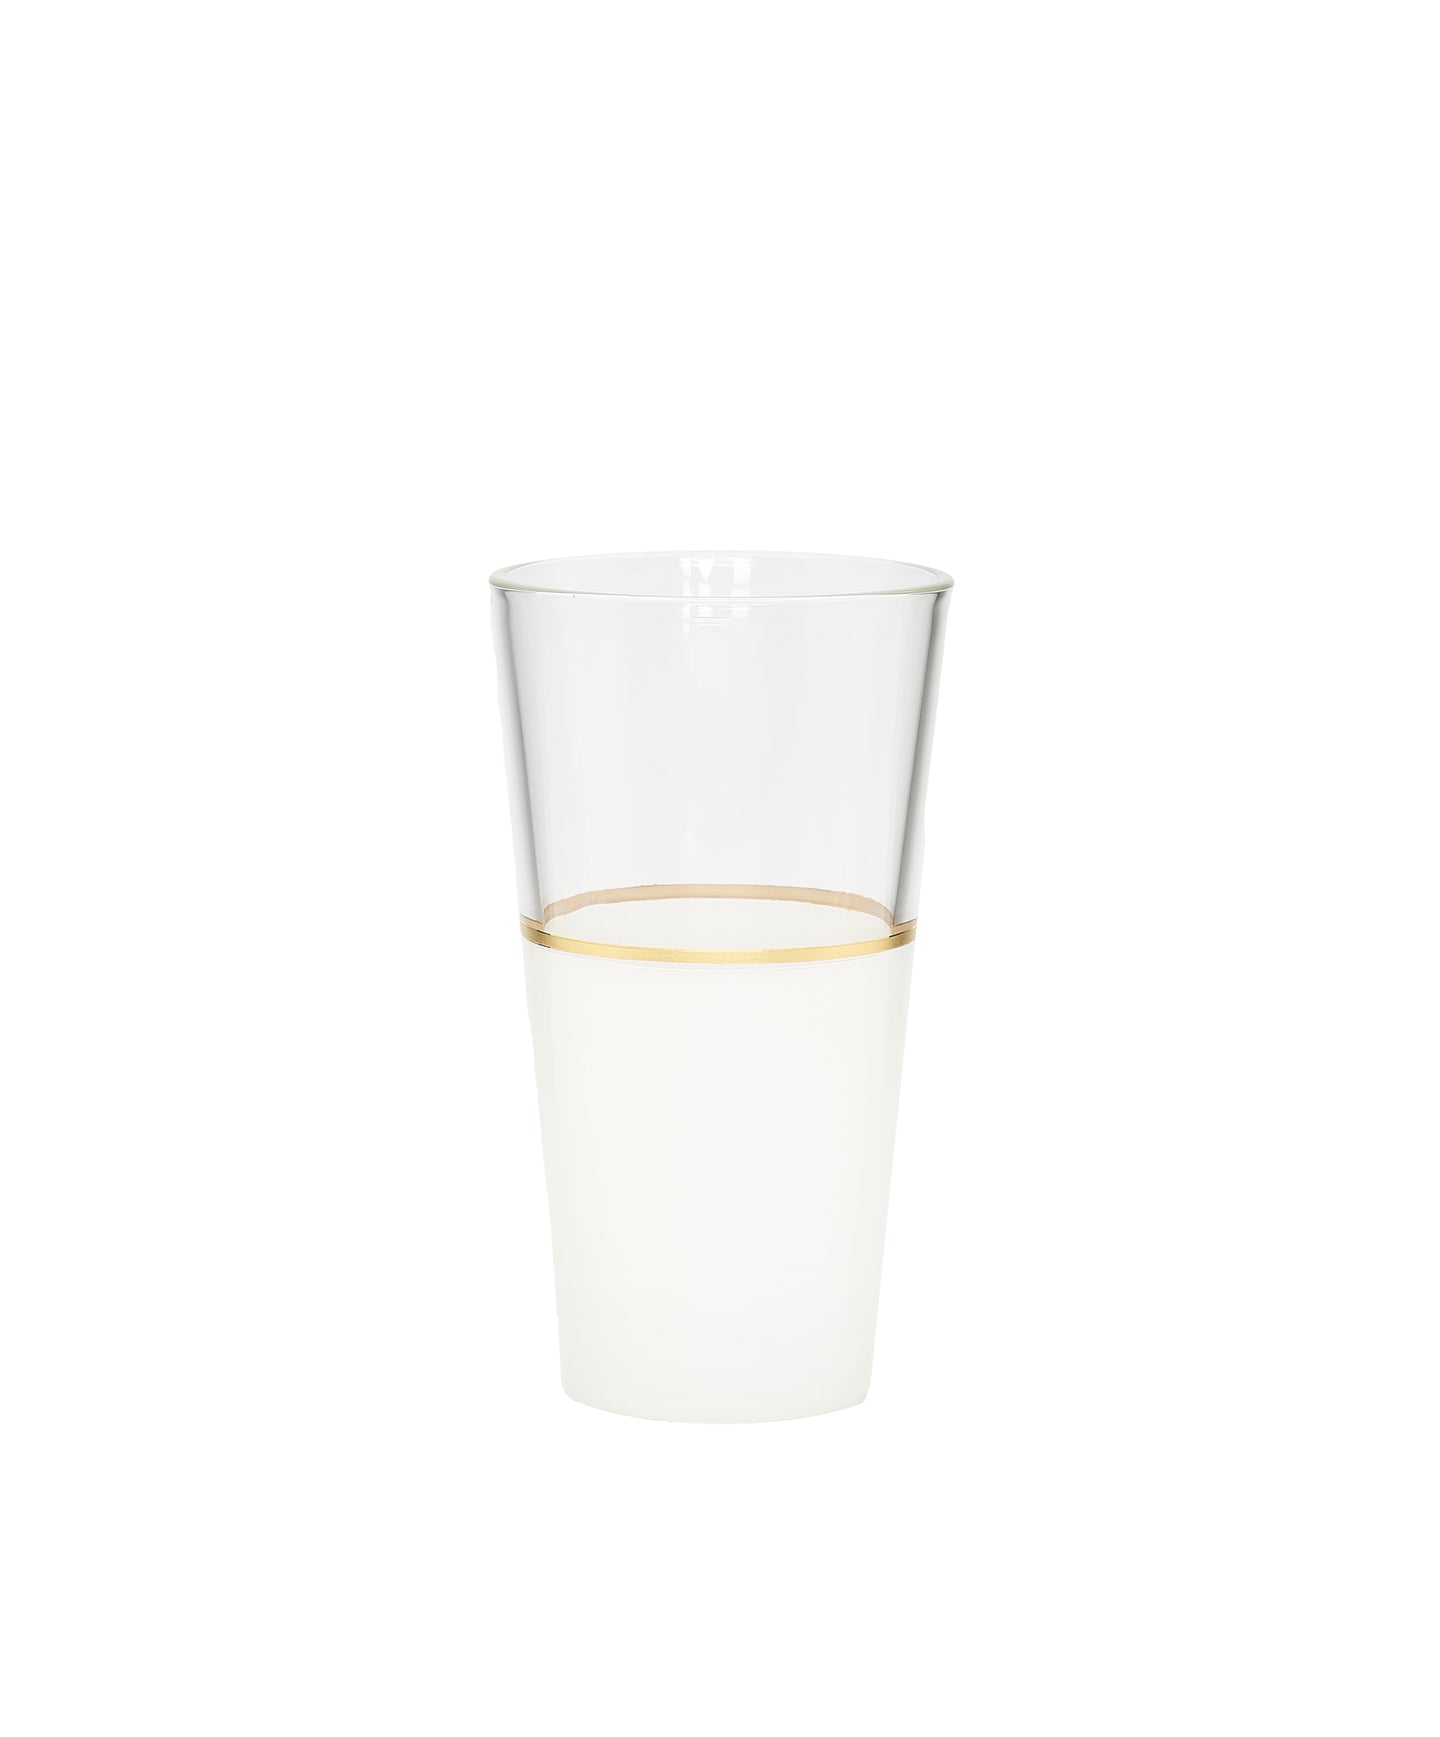 Set of 6 Tumblers White/Clear with Gold Trim